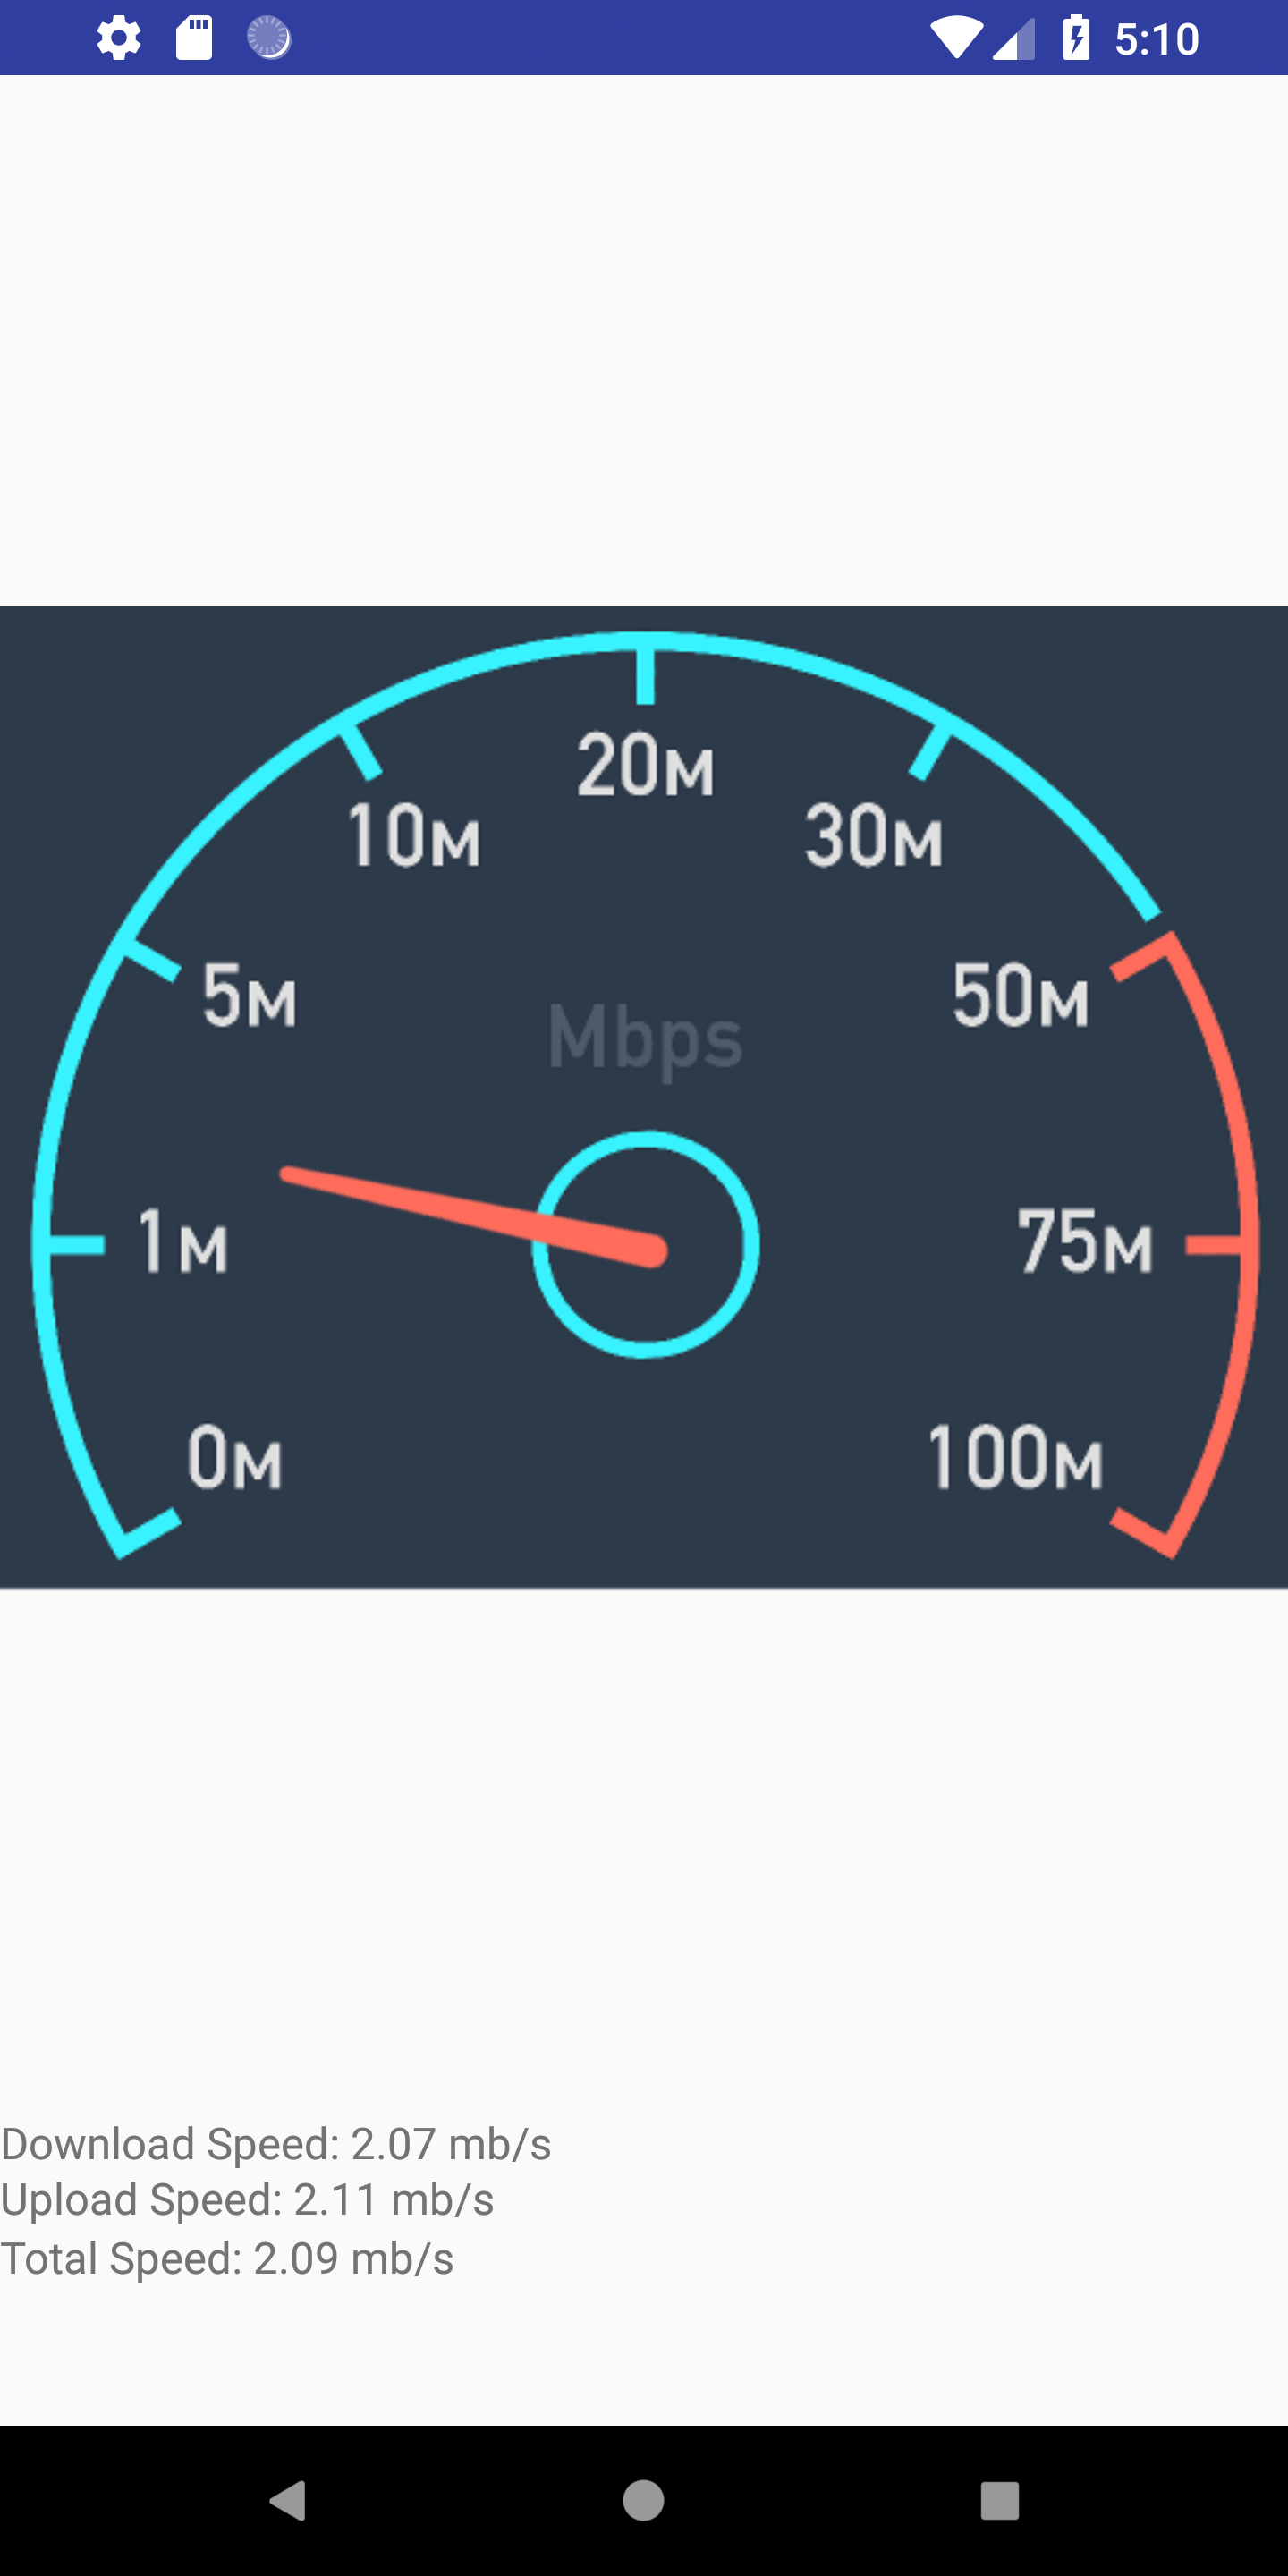 android app for testing internet speed